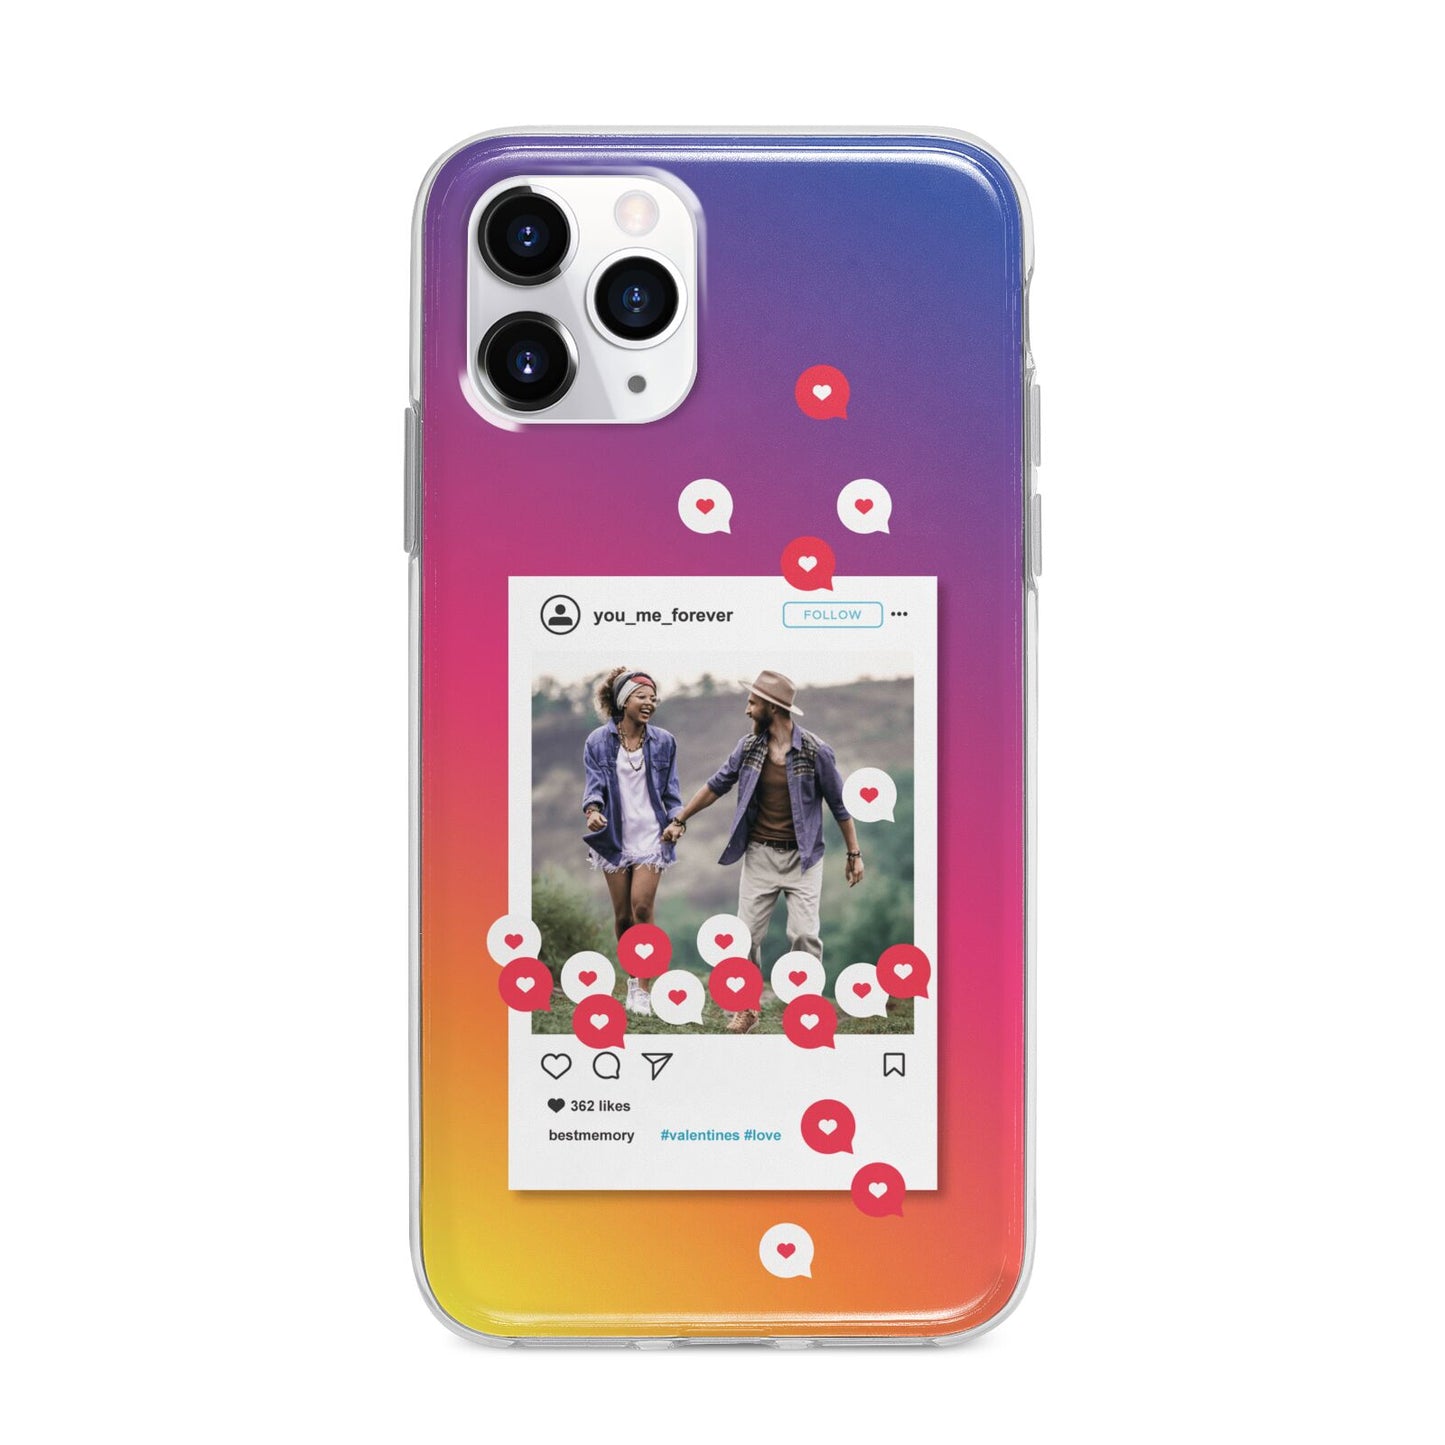 Personalised Social Media Photo Apple iPhone 11 Pro Max in Silver with Bumper Case